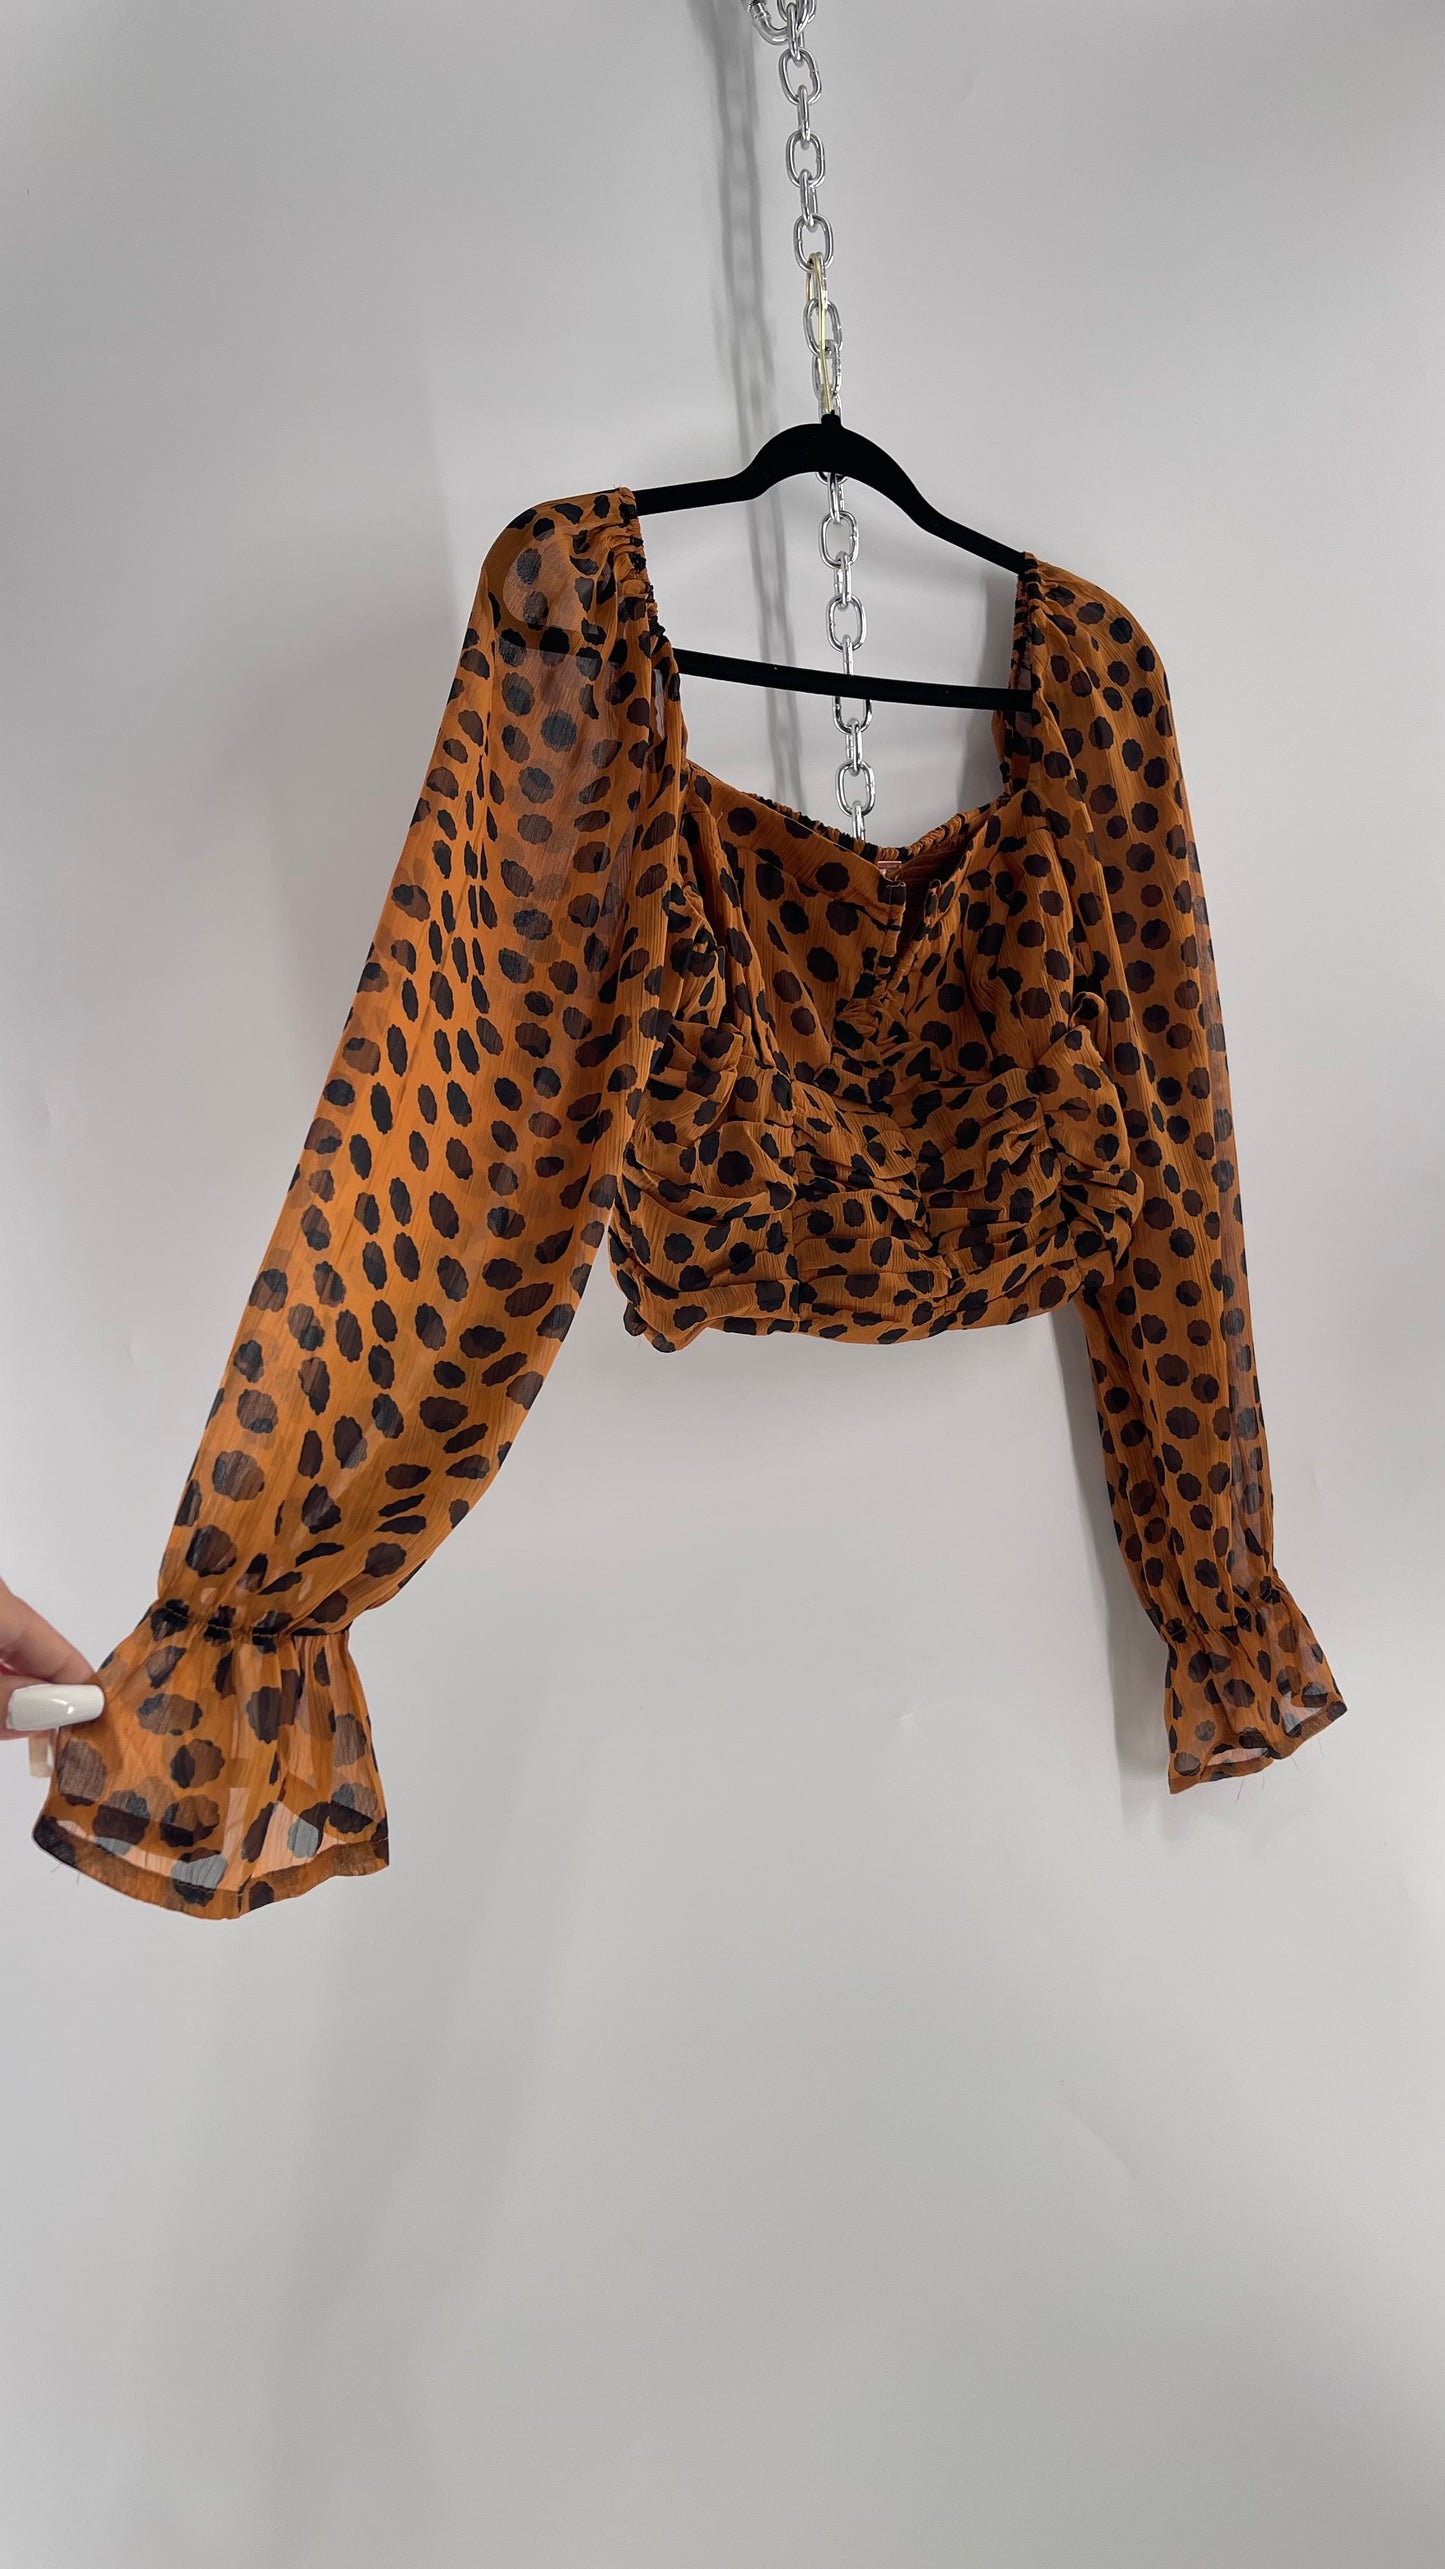 Free People Brown Black Animal Print Blouse with Ruched Bodice and Tags Attached (Large)